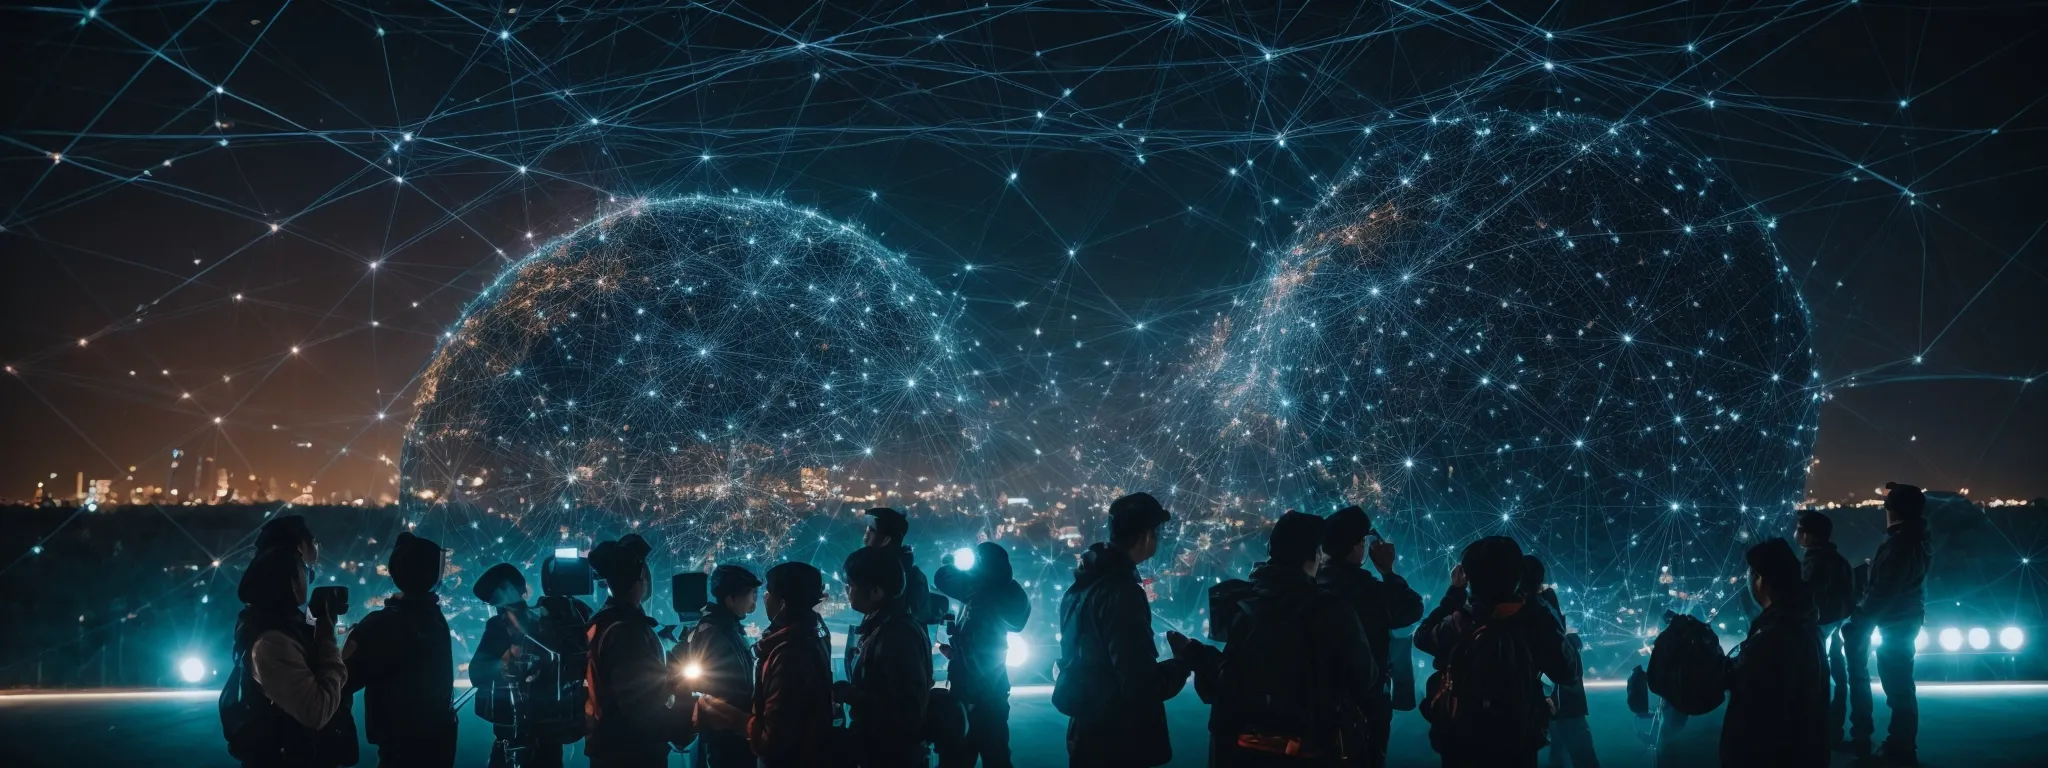 people shaking hands across a digital world map illuminated by network connections.